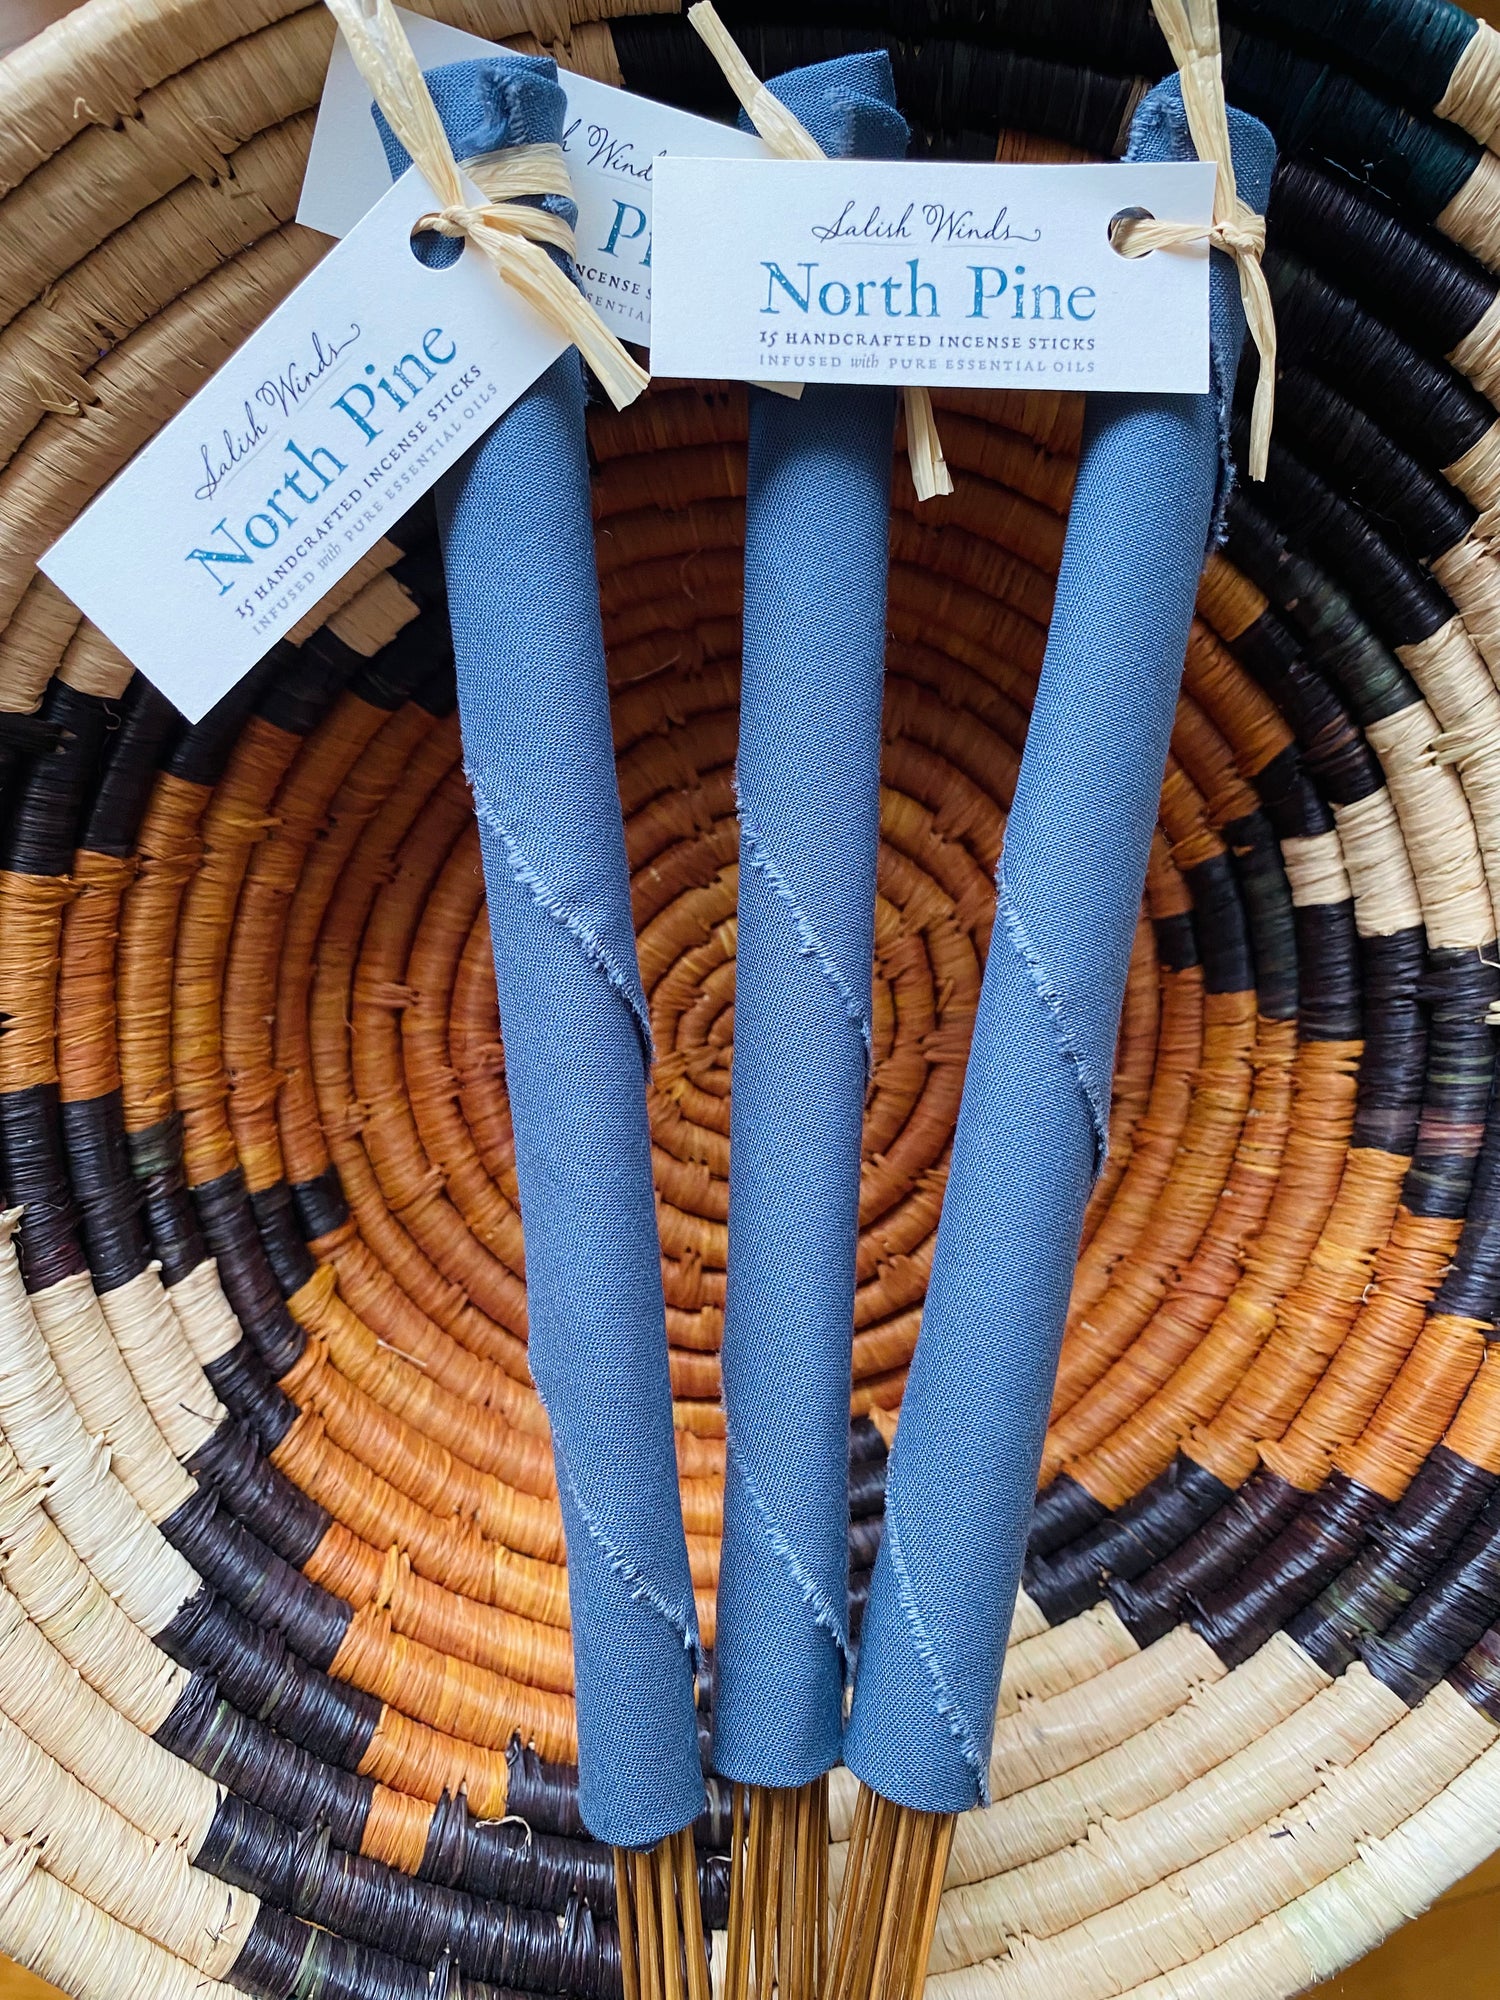 Salish Winds Local PNW Incense- North Pine - Moon Room Shop and Wellness